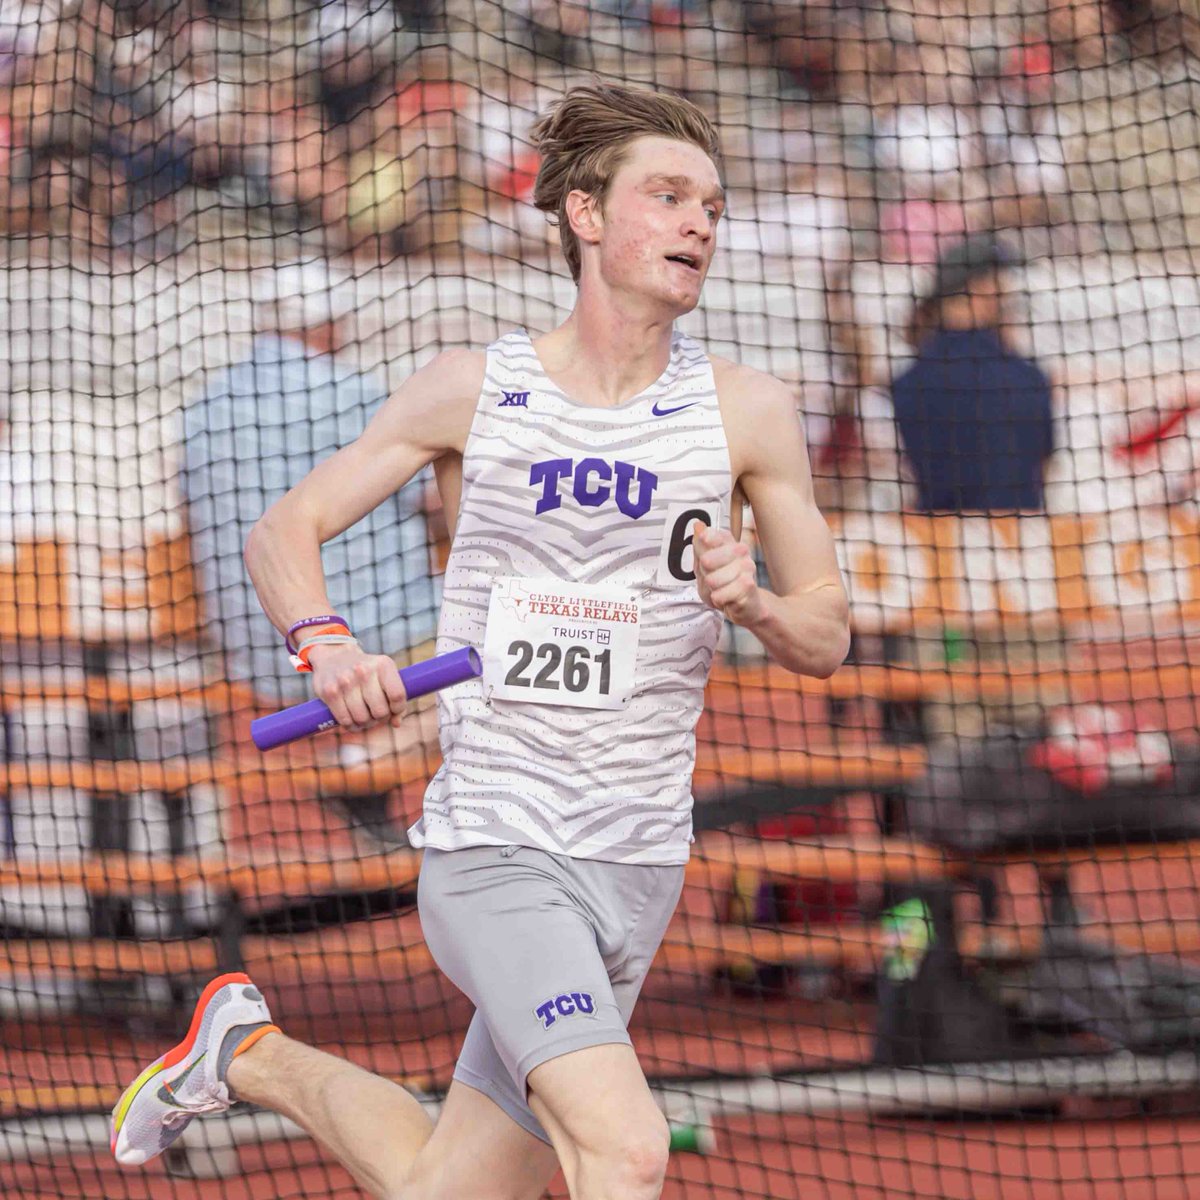 The men's sprint medley squad finishes 11th overall with their time of 3:21.99! #GoFrogs